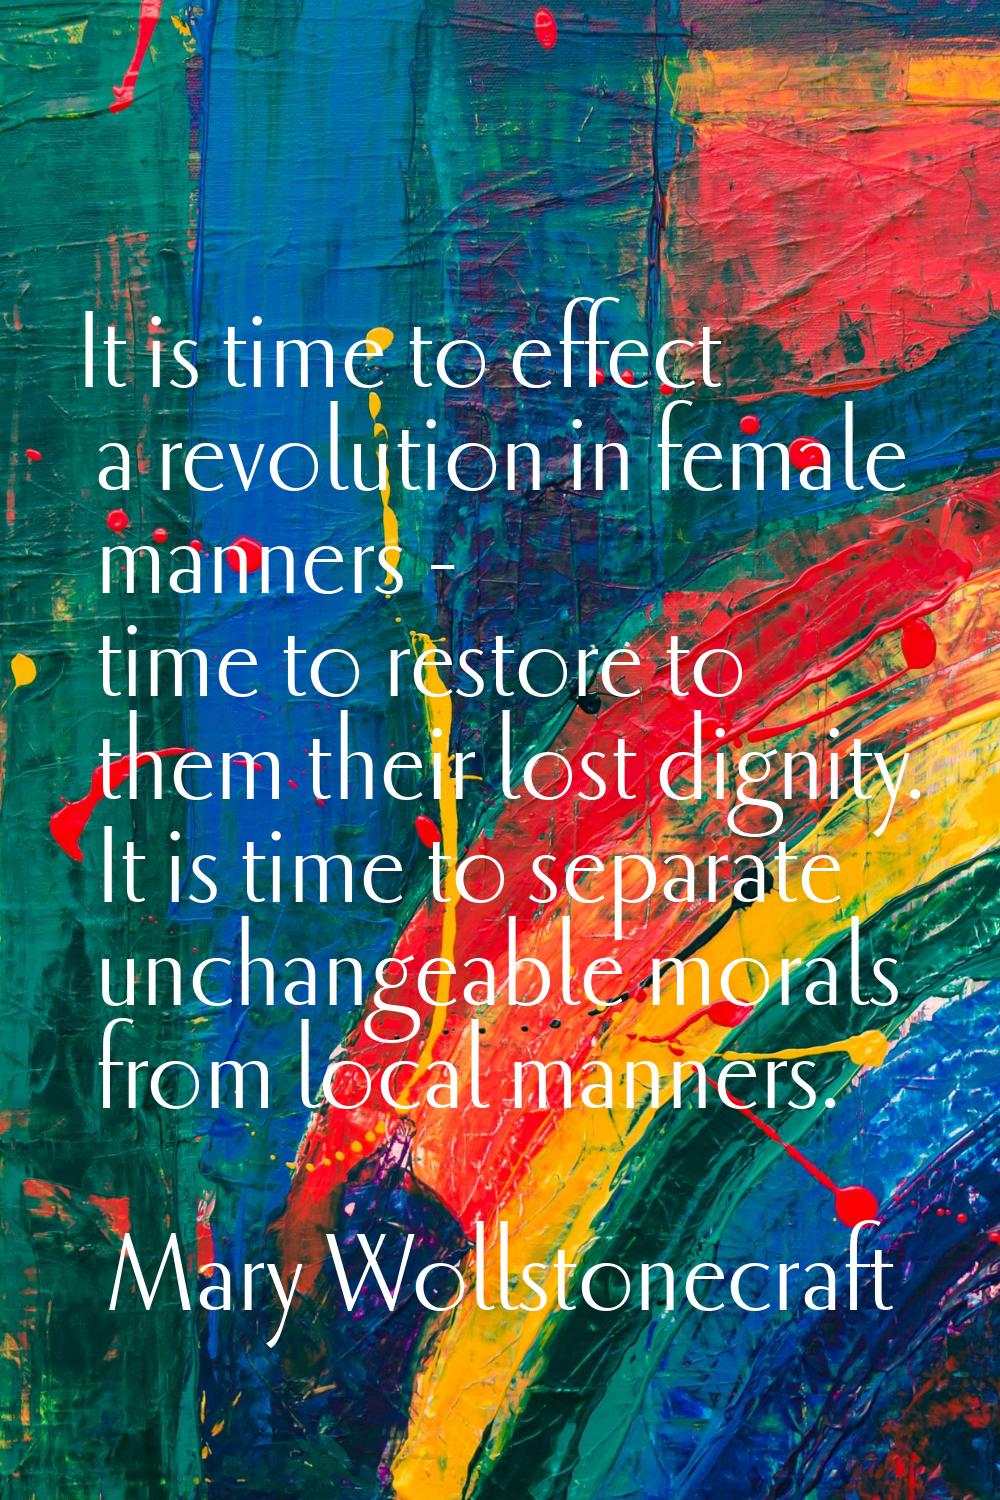 It is time to effect a revolution in female manners - time to restore to them their lost dignity. I